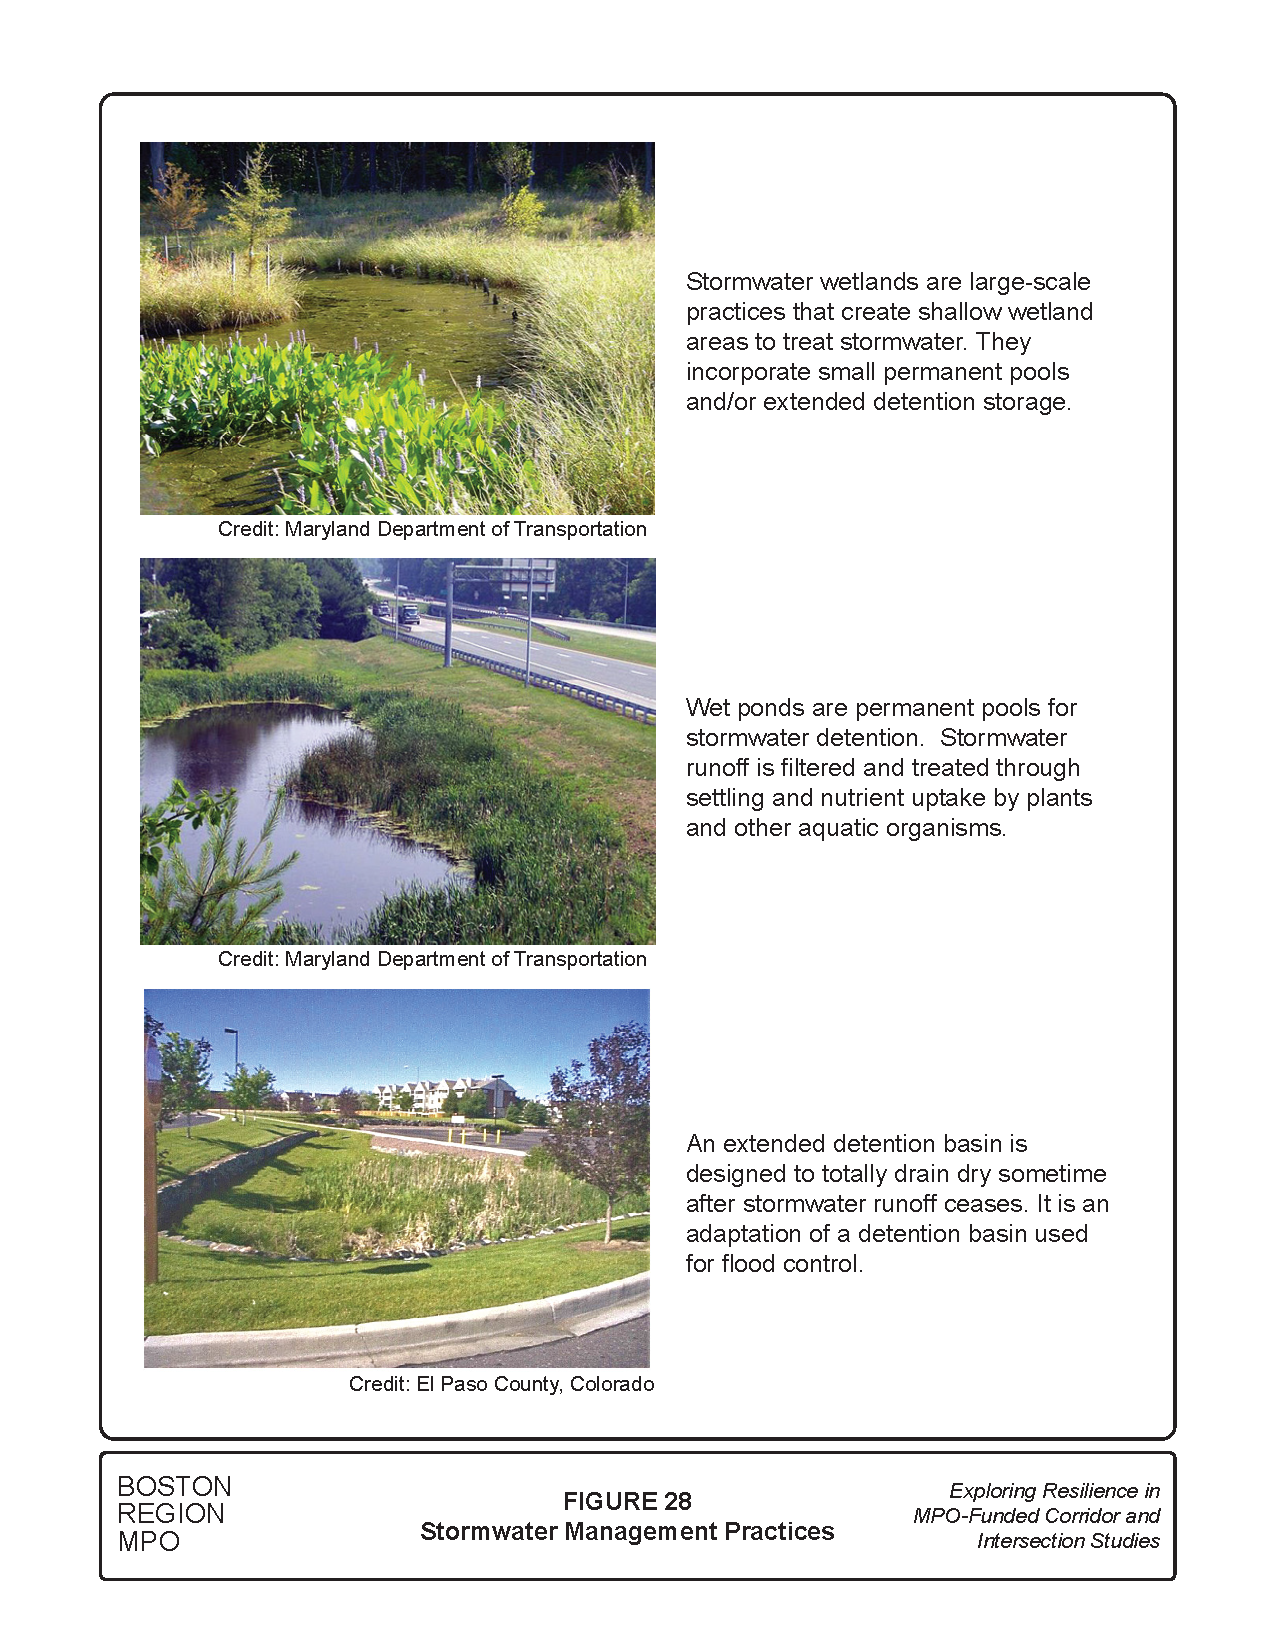 Figure 28 shows pictures of ponds and detention basins that are part of stormwater management practices.